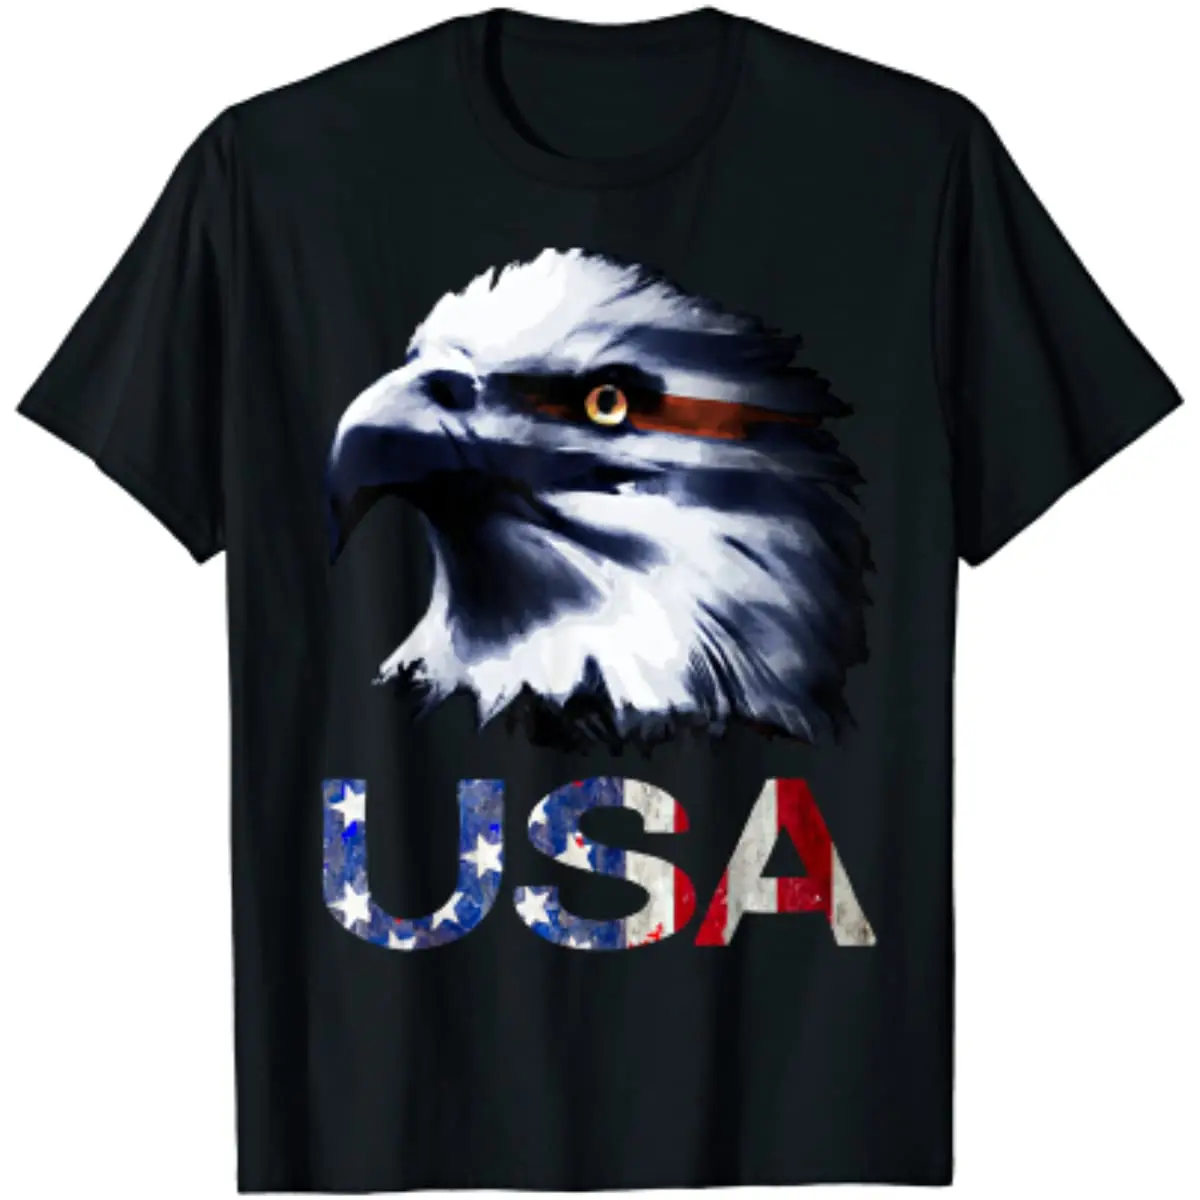 

USA Patriotic Eagle Head 4th of July Independence Day T-Shirt Graphic T Shirts Streetwear Casual Cotton Daily Four Seasons